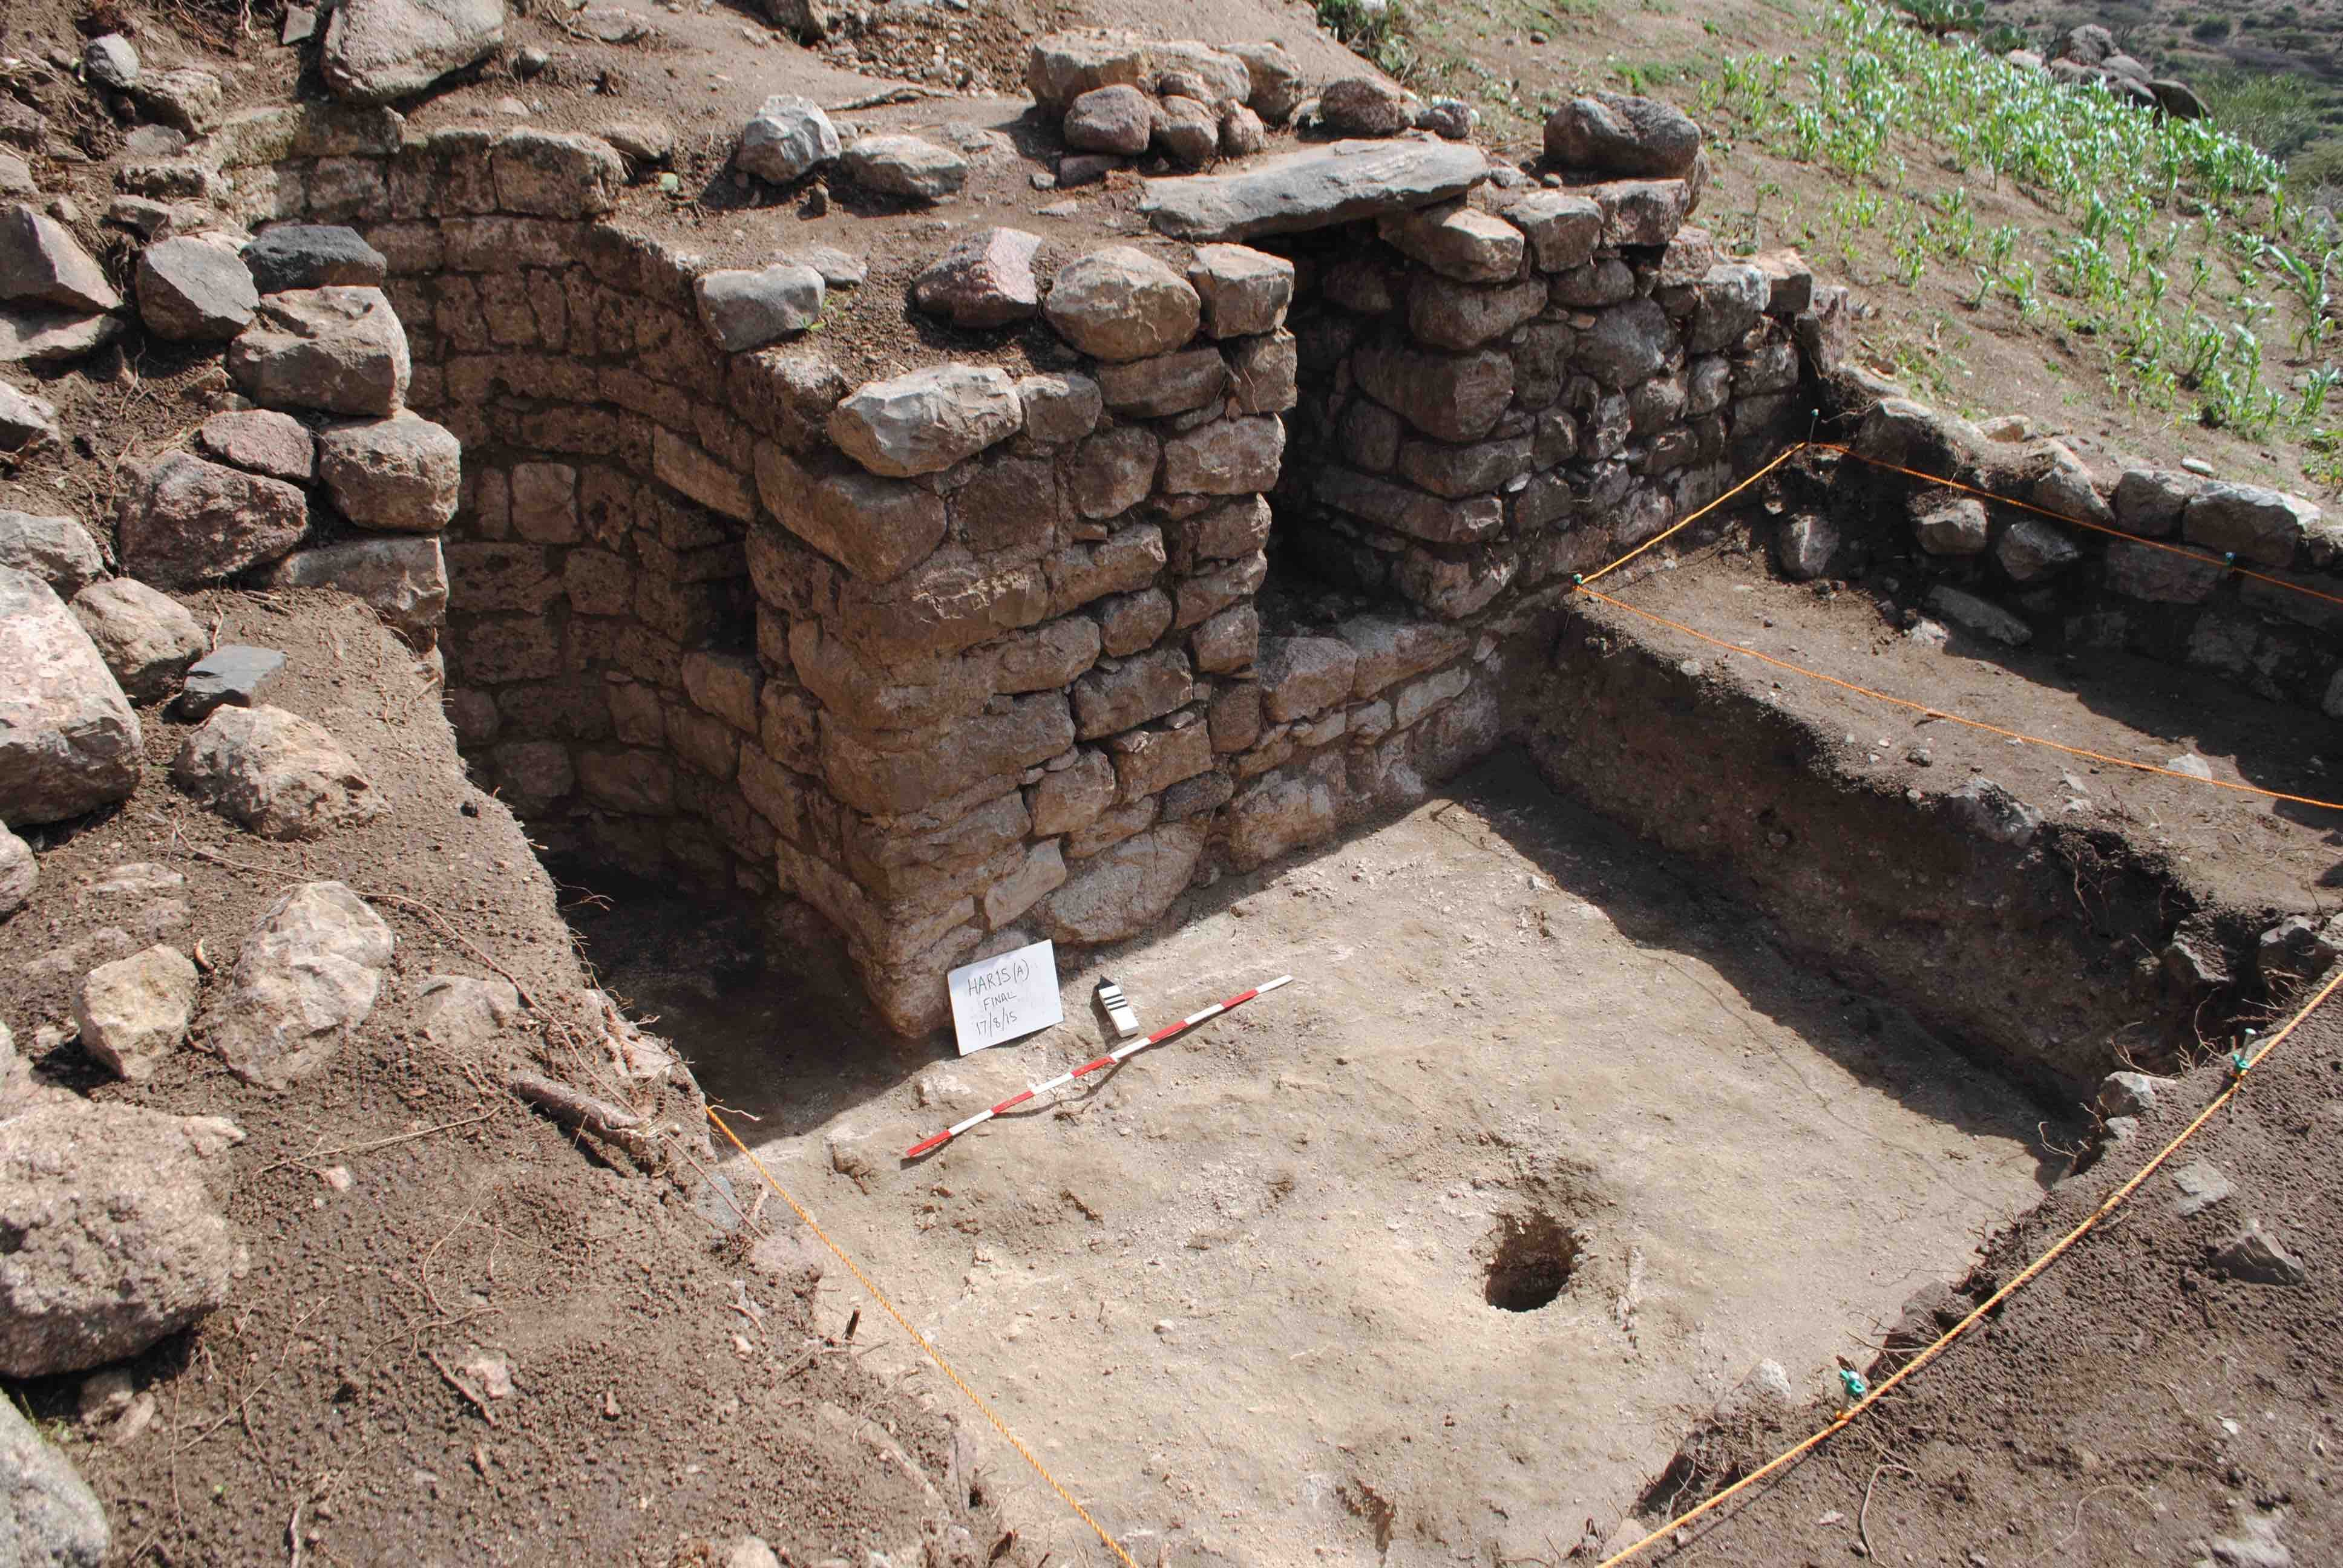 Ancient City Of Colossus Discovered In East African Country, Able To Rewrite History